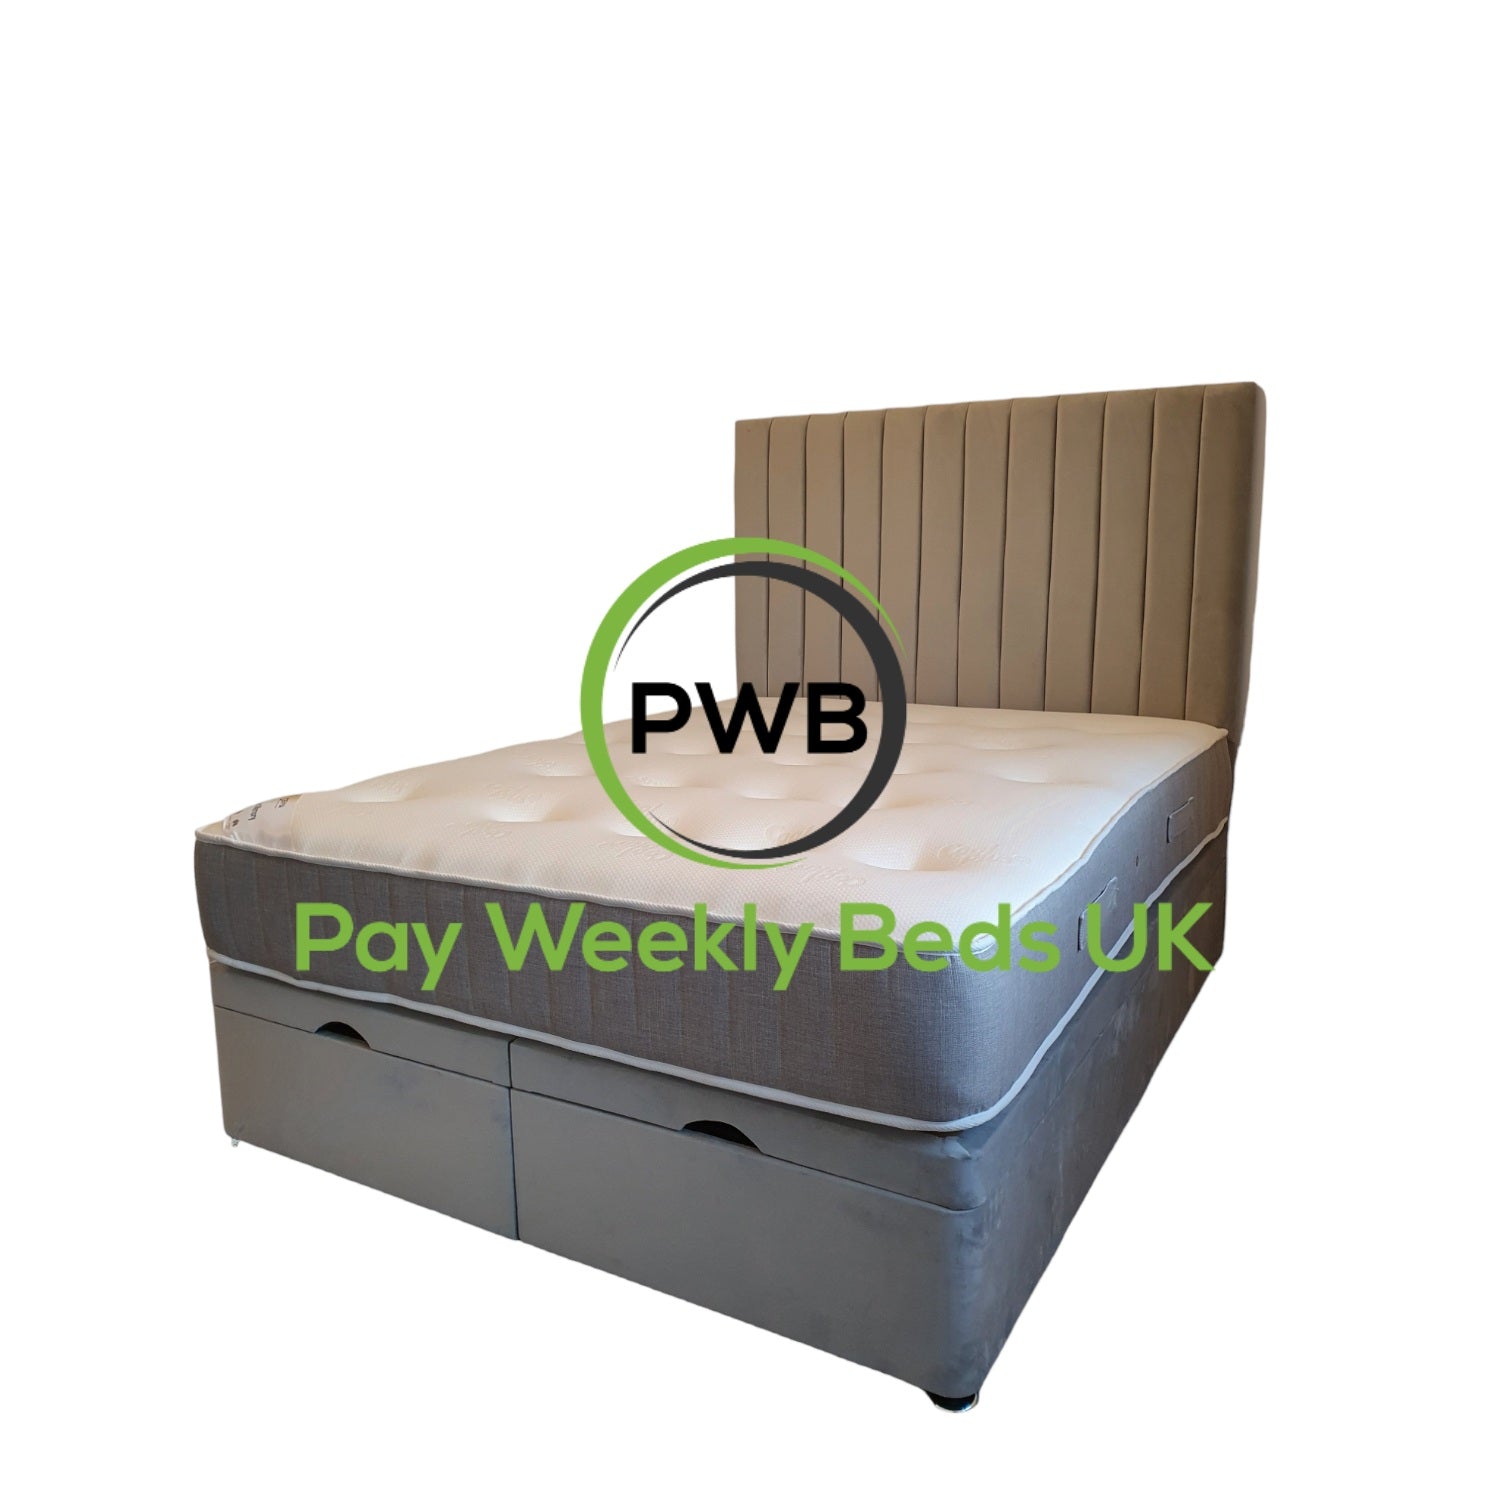 King Size Storage Beds - Pay Weekly Beds UK